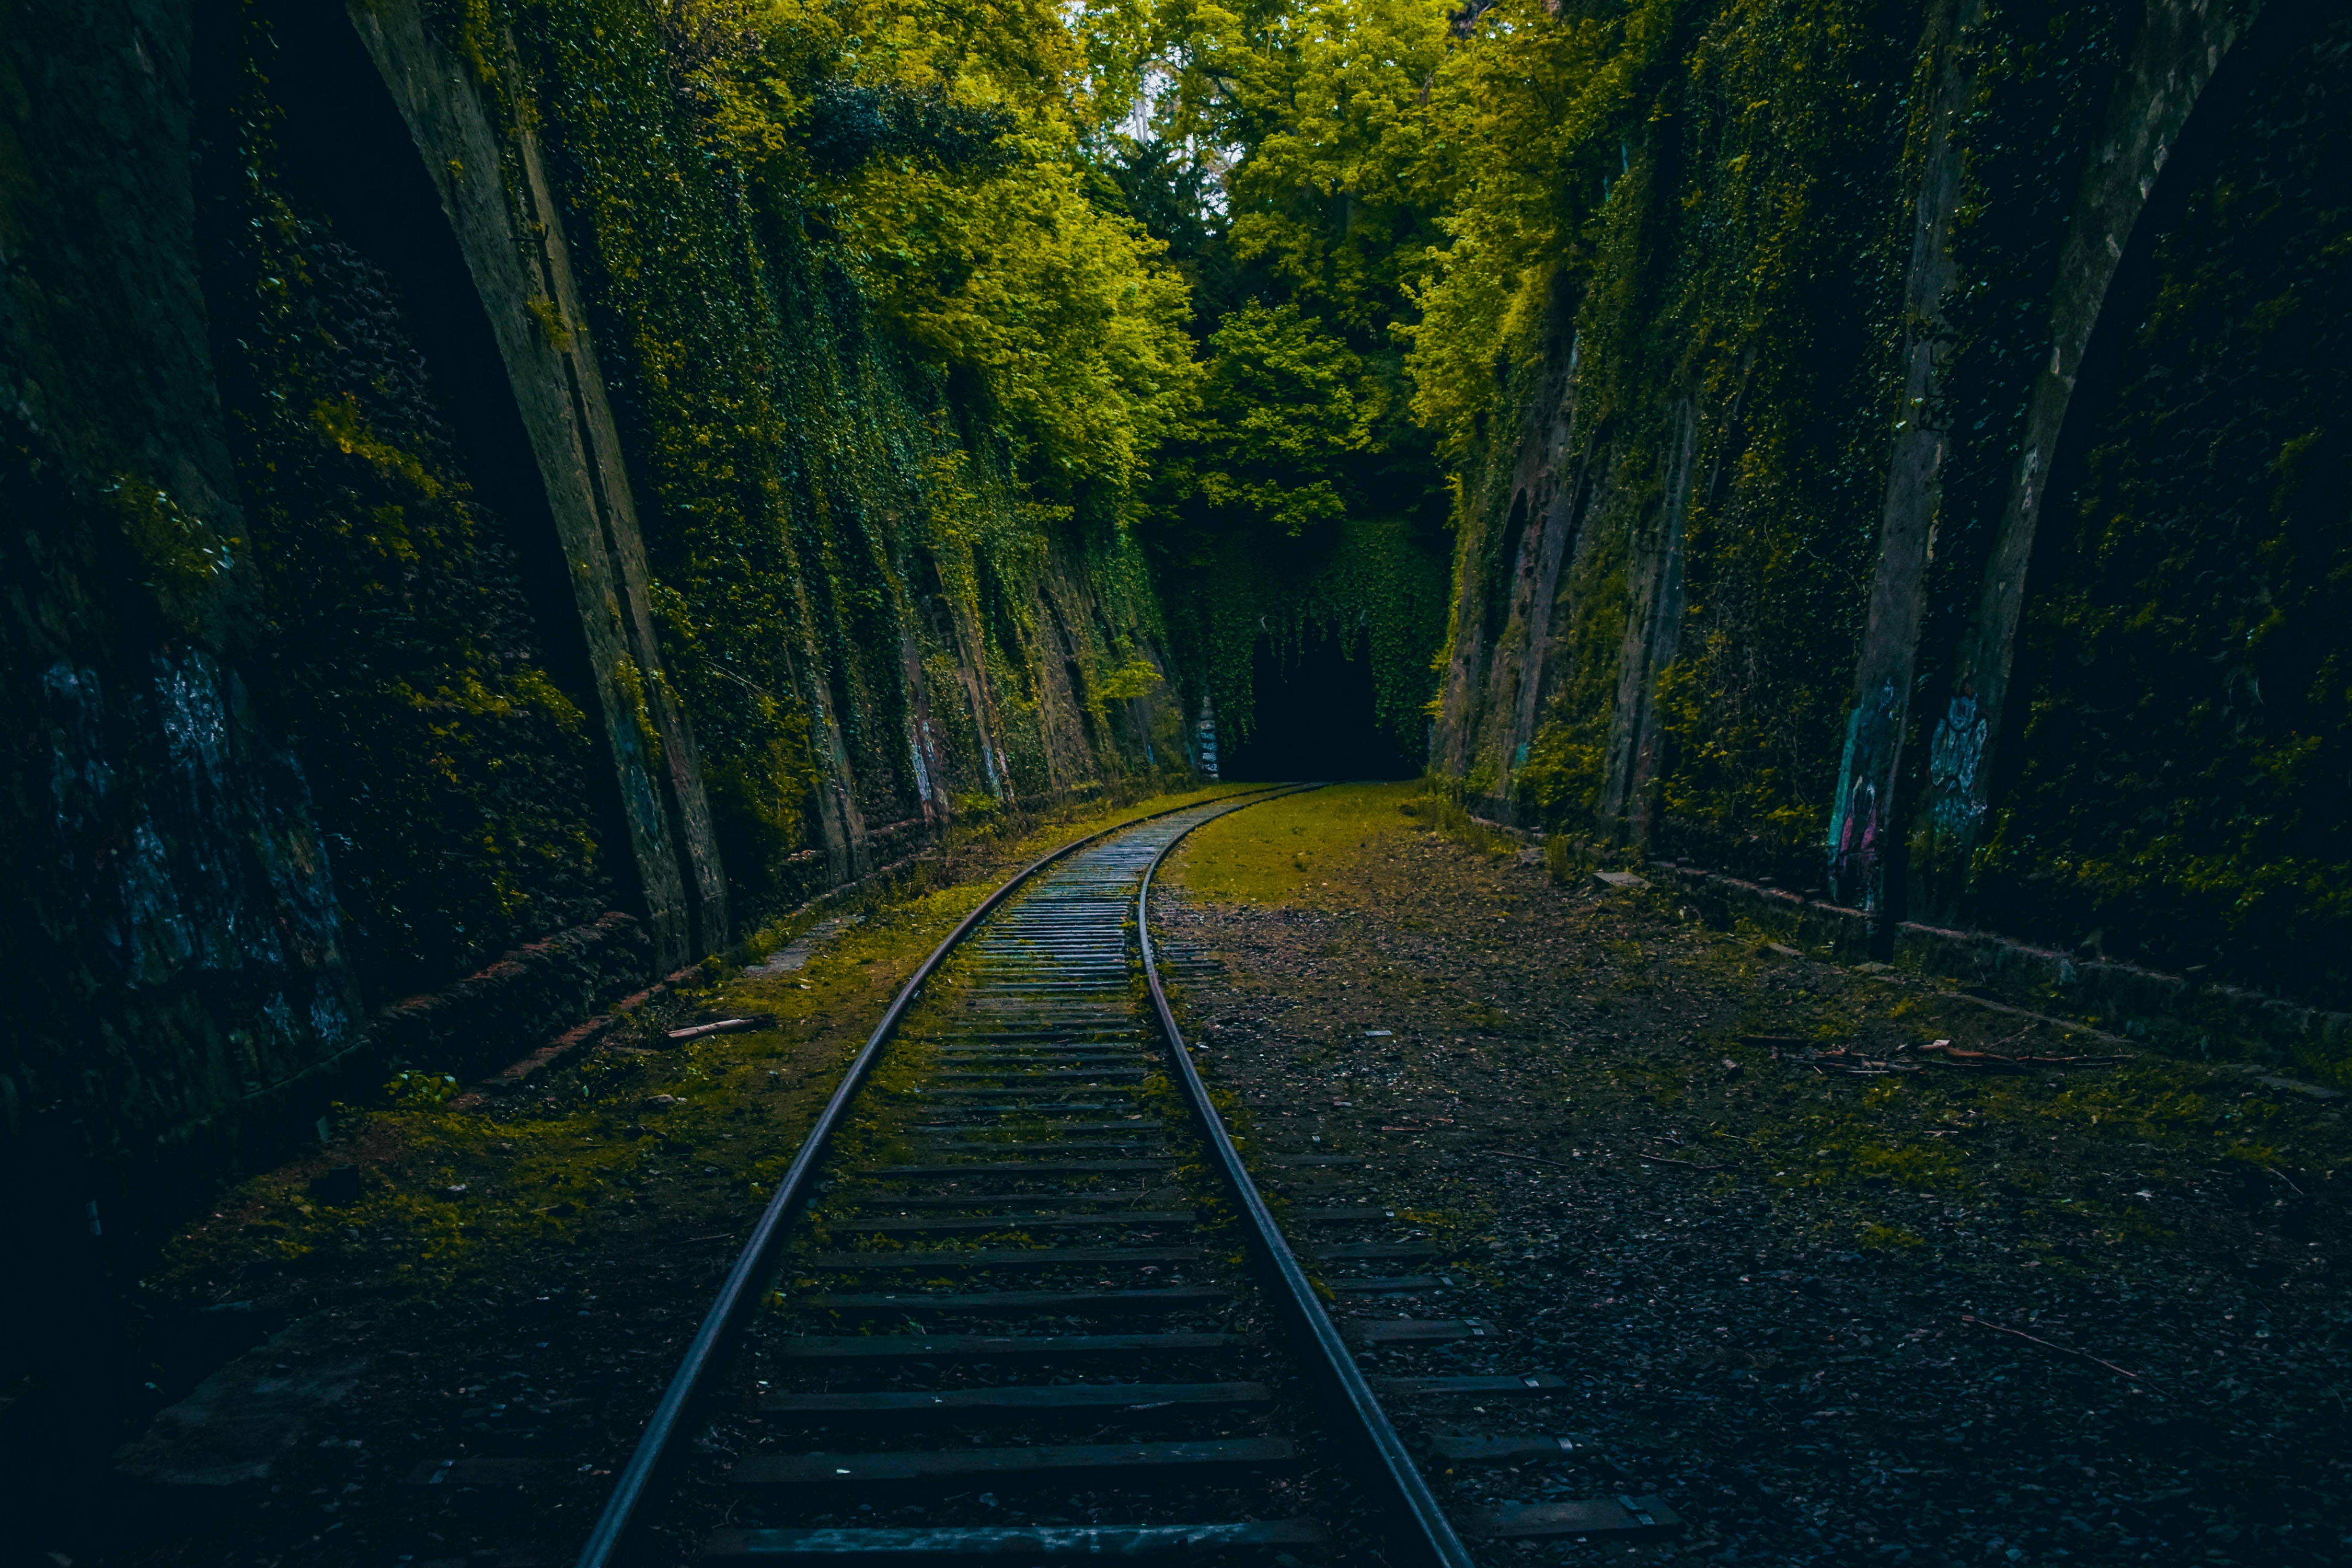 An abandoned railroad running through an artificially created gorge